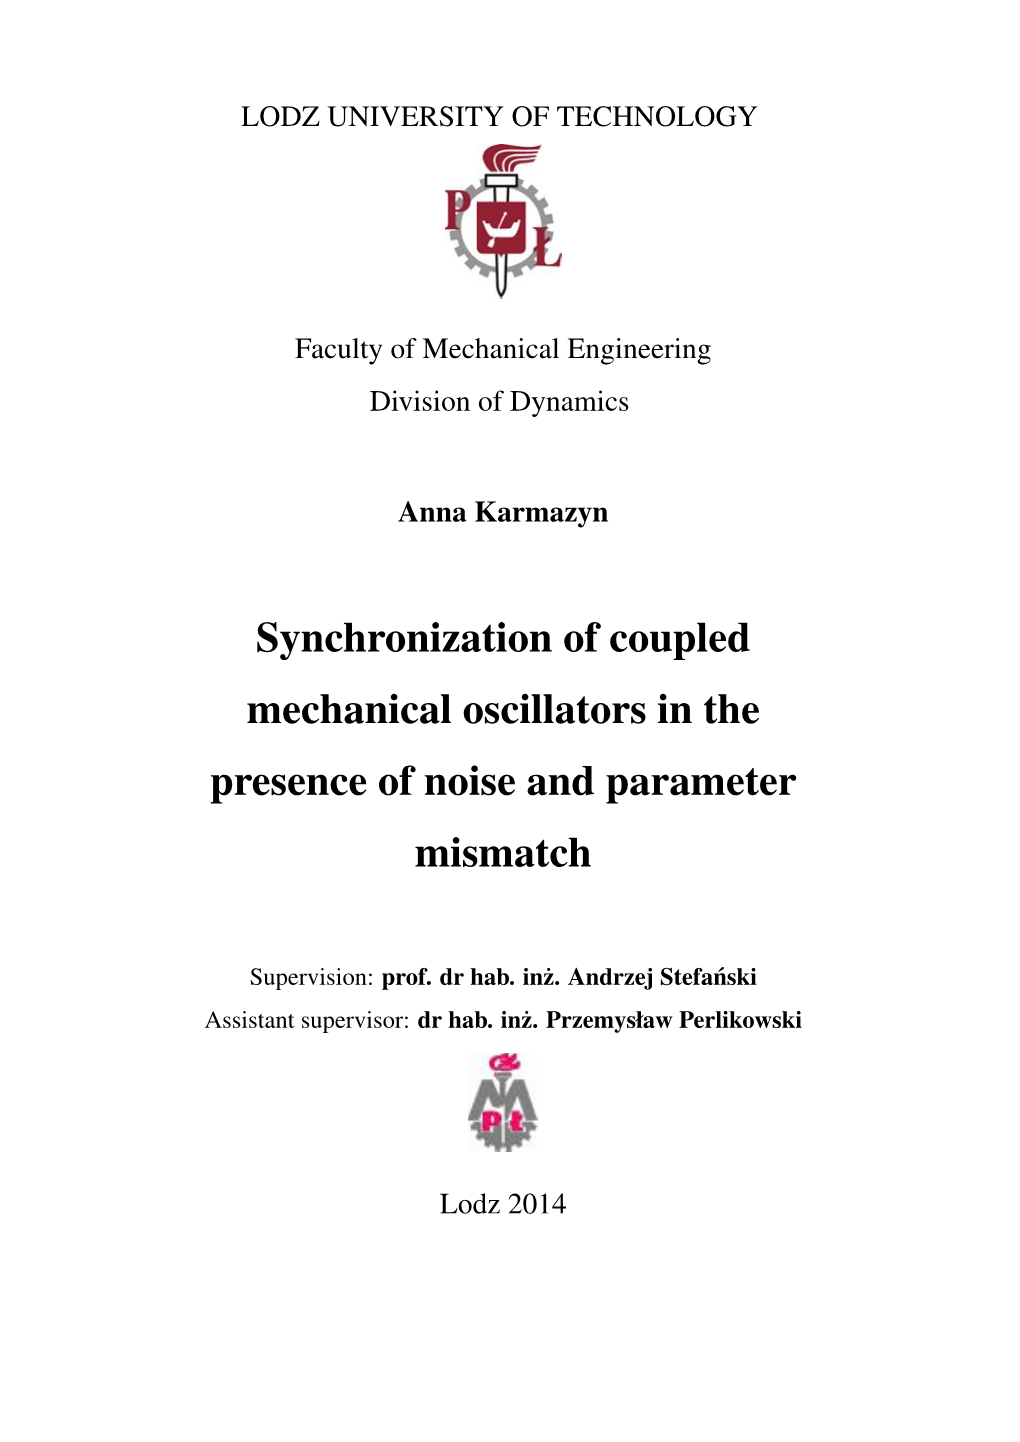 Synchronization of Coupled Mechanical Oscillators in the Presence of Noise and Parameter Mismatch